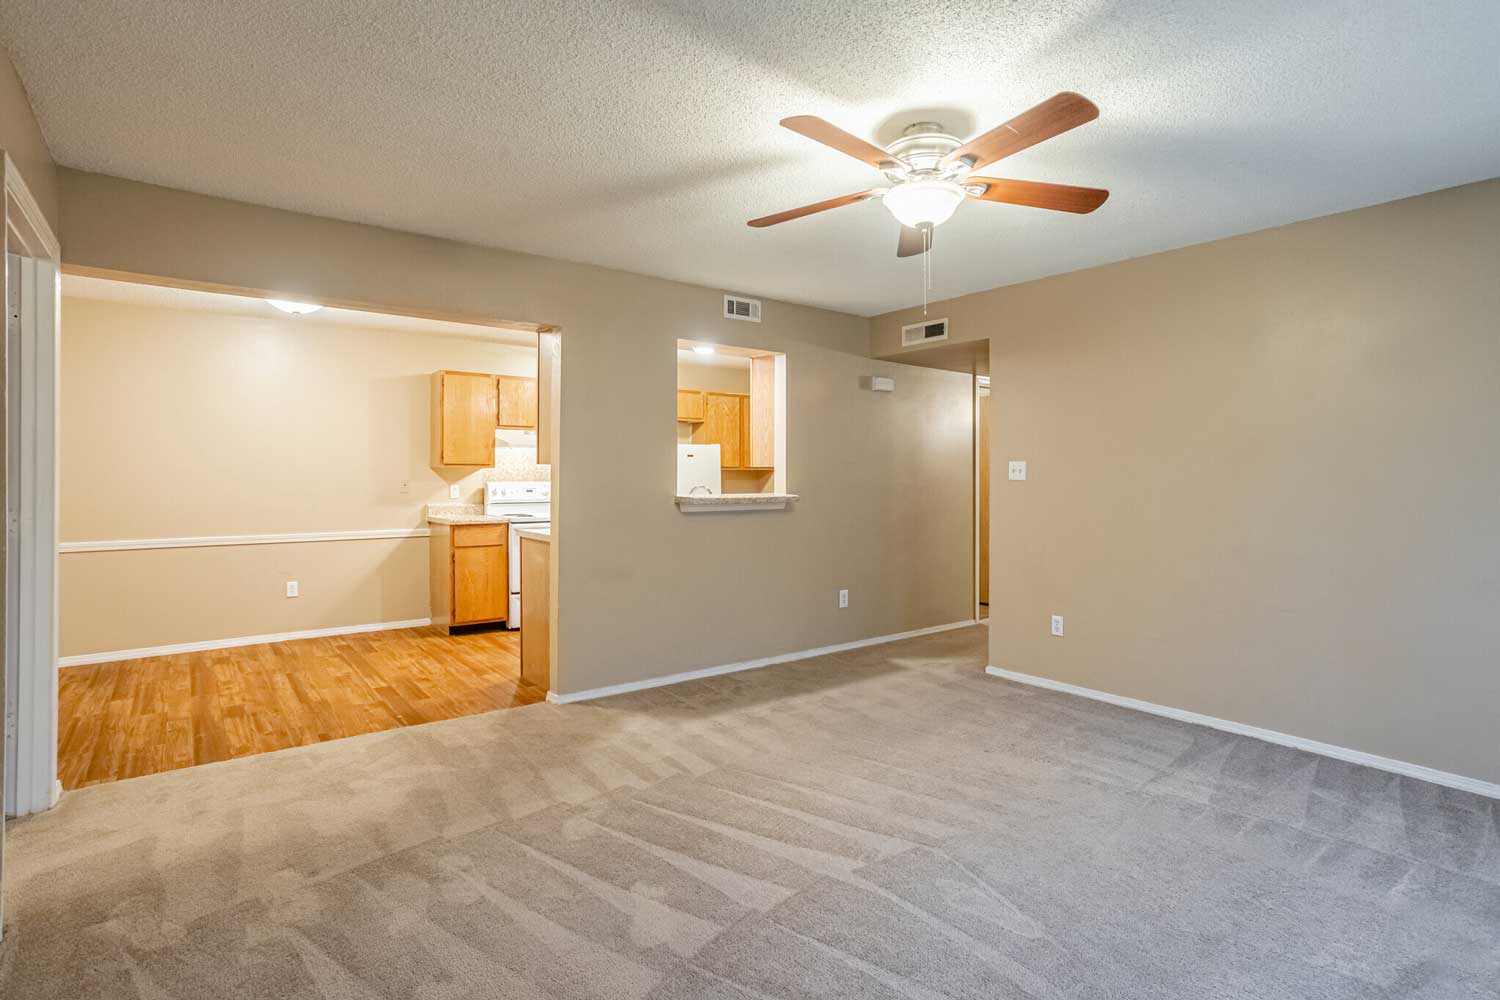 Spacious Apartment Interior at Crown Ridge Apartments in Fayetteville, AR